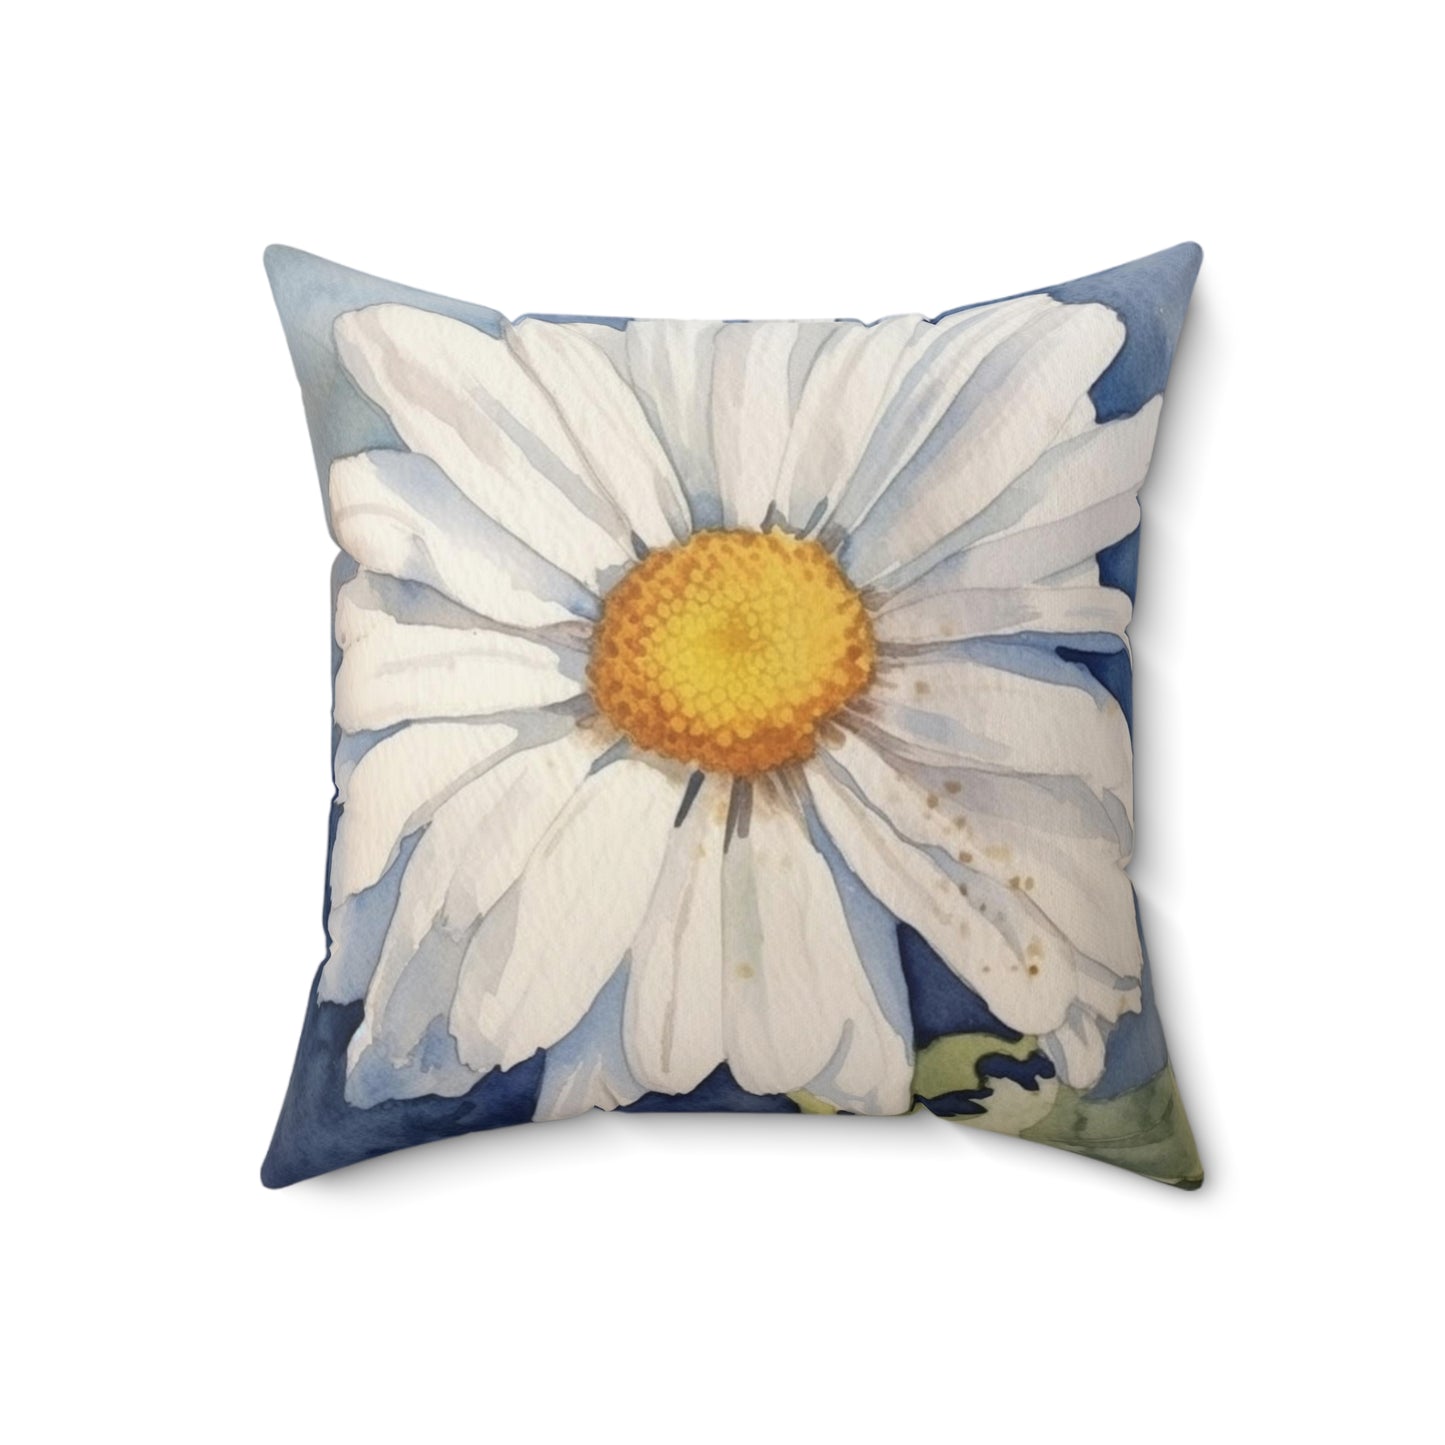 Daisy Filled Pillow with Insert, Floral White Flower Square Throw Accent Decorative Room Decor Floor Sofa Couch Cushion Starcove Fashion